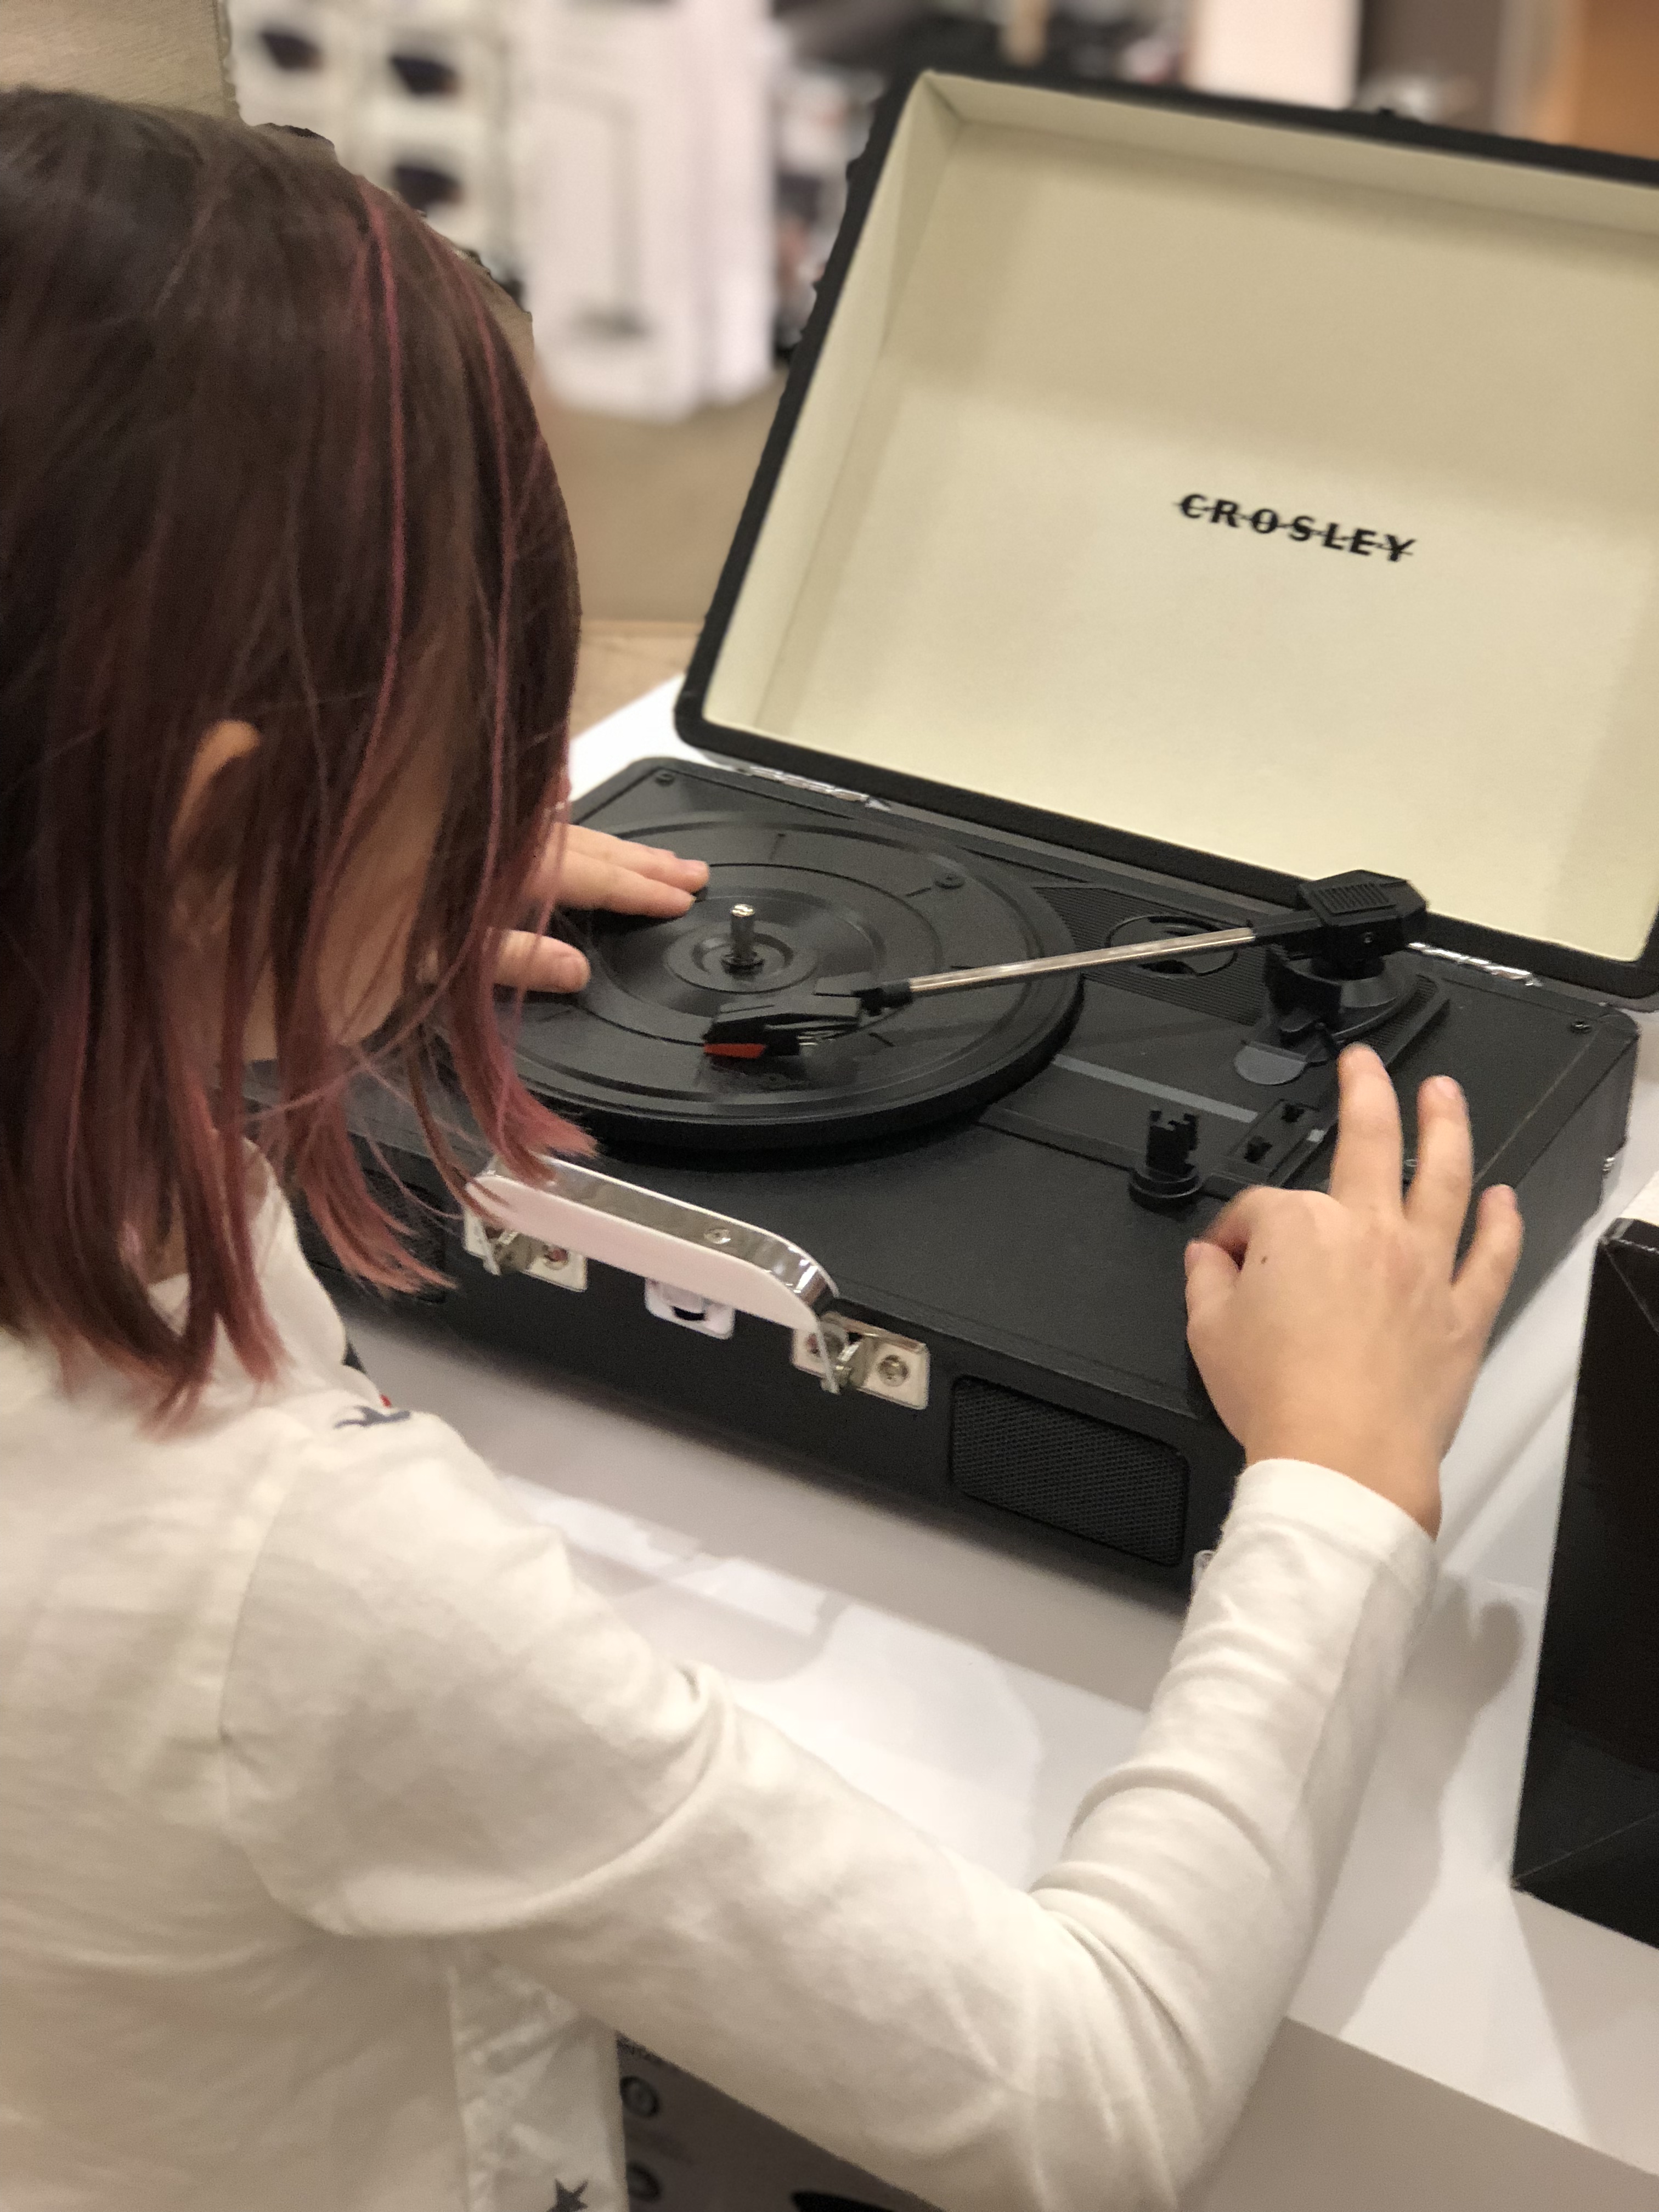 Secret Santa gifts for the whole family: Crosley record player | Sponsored